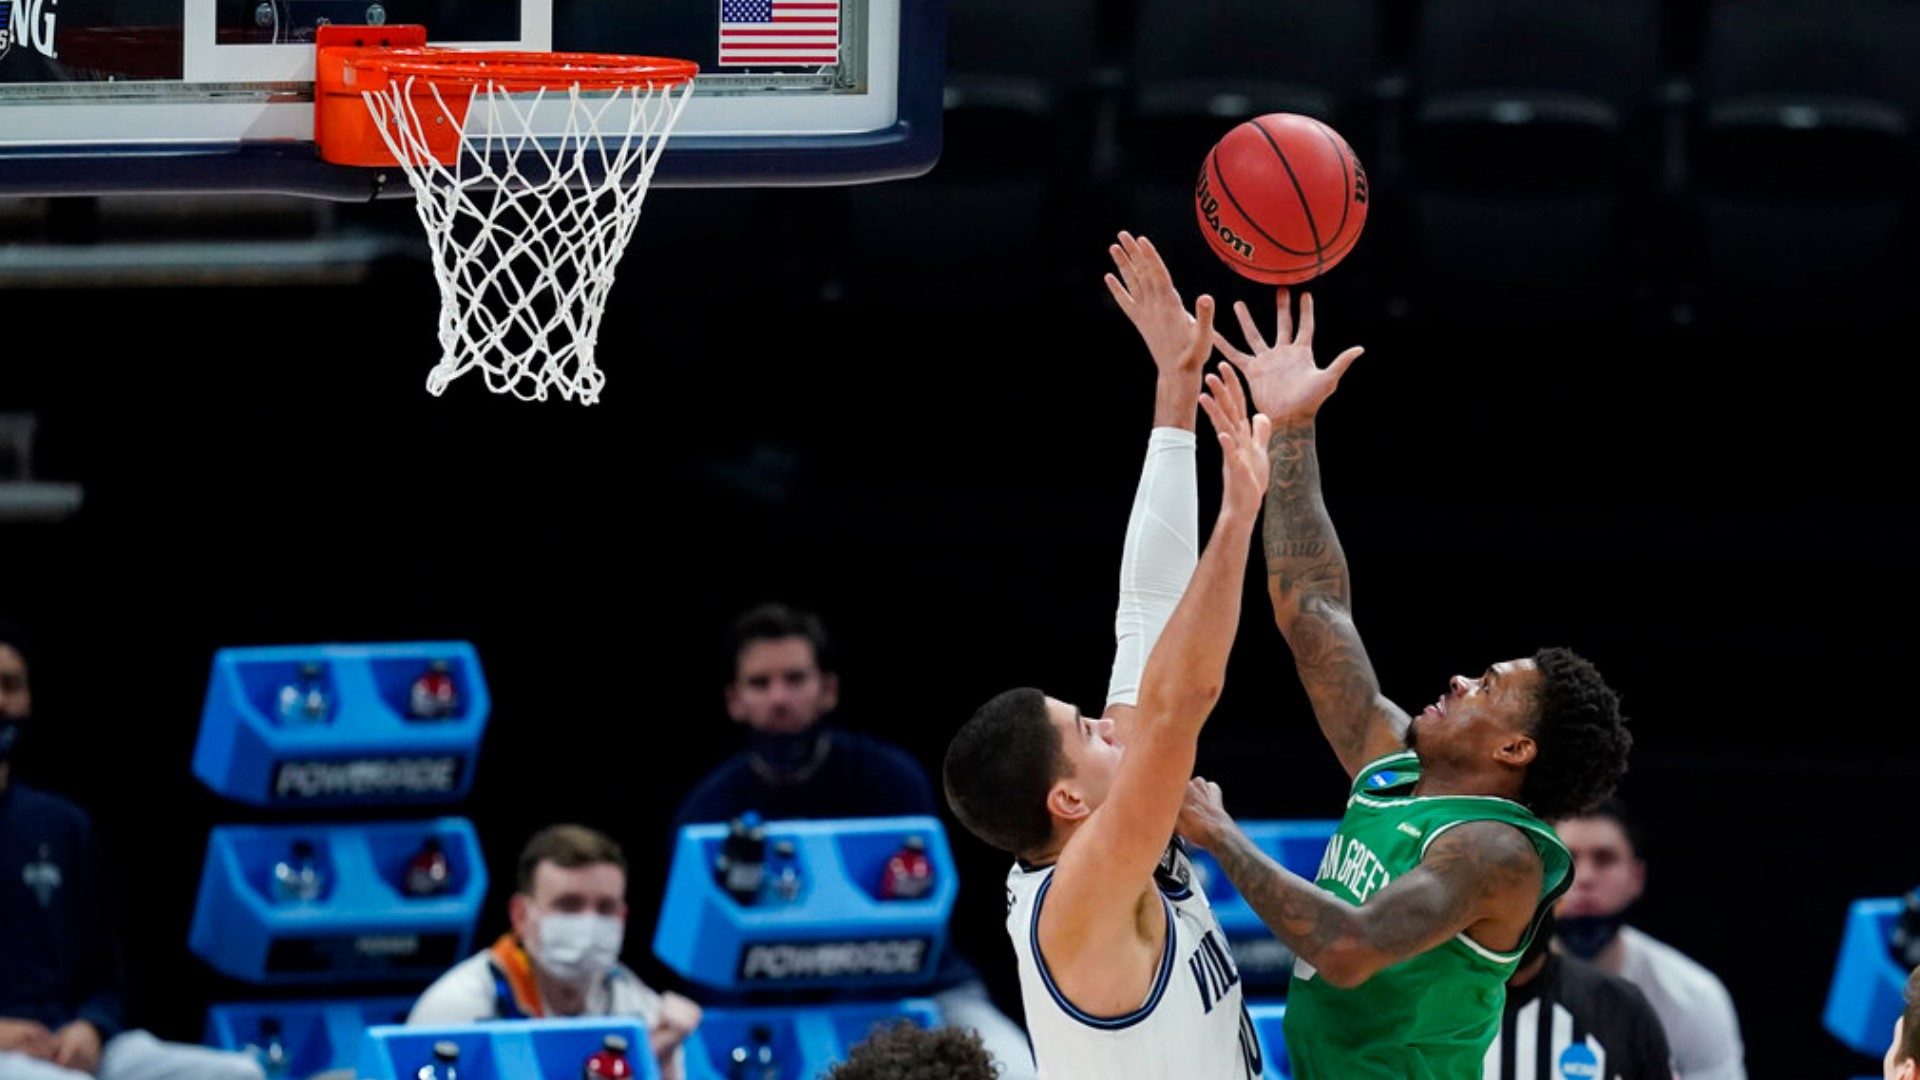 UNT fell to Villanova Sunday night, but Joe Trahan says: The story doesn't end here. This team will go down in school history.